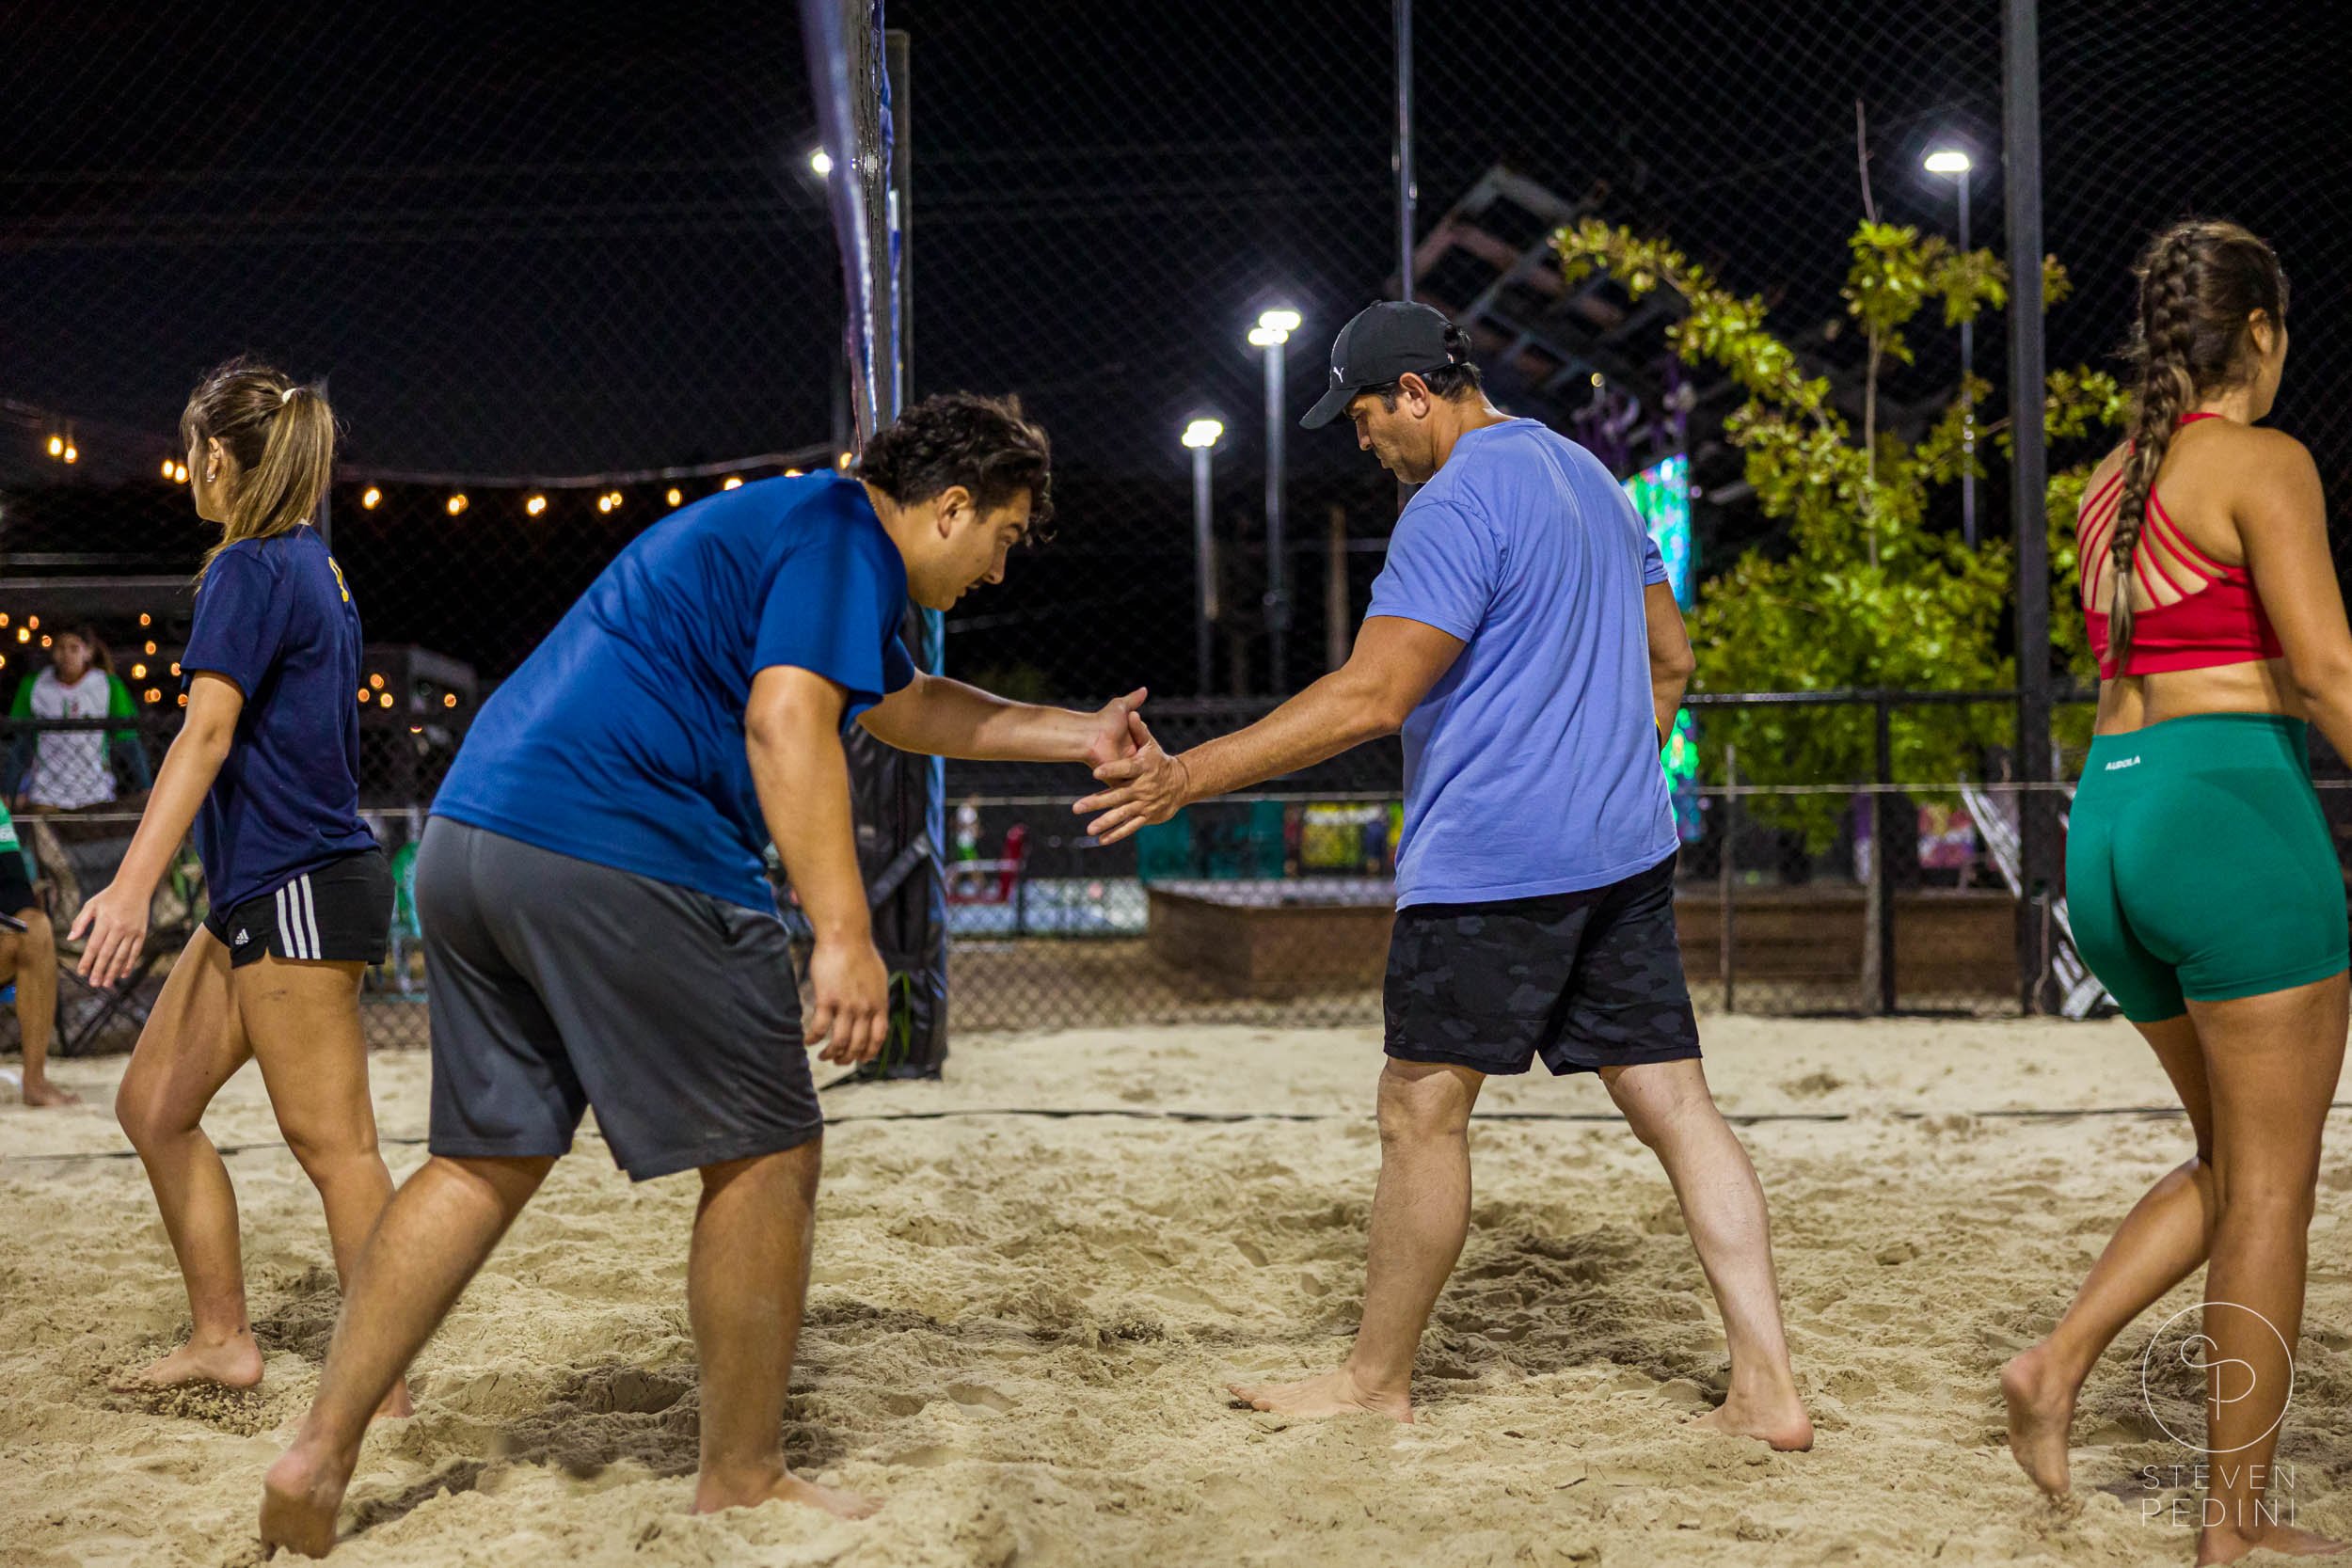 Steven Pedini Photography - Bumpy Pickle - Sand Volleyball - Houston TX - World Cup of Volleyball - 00391.jpg